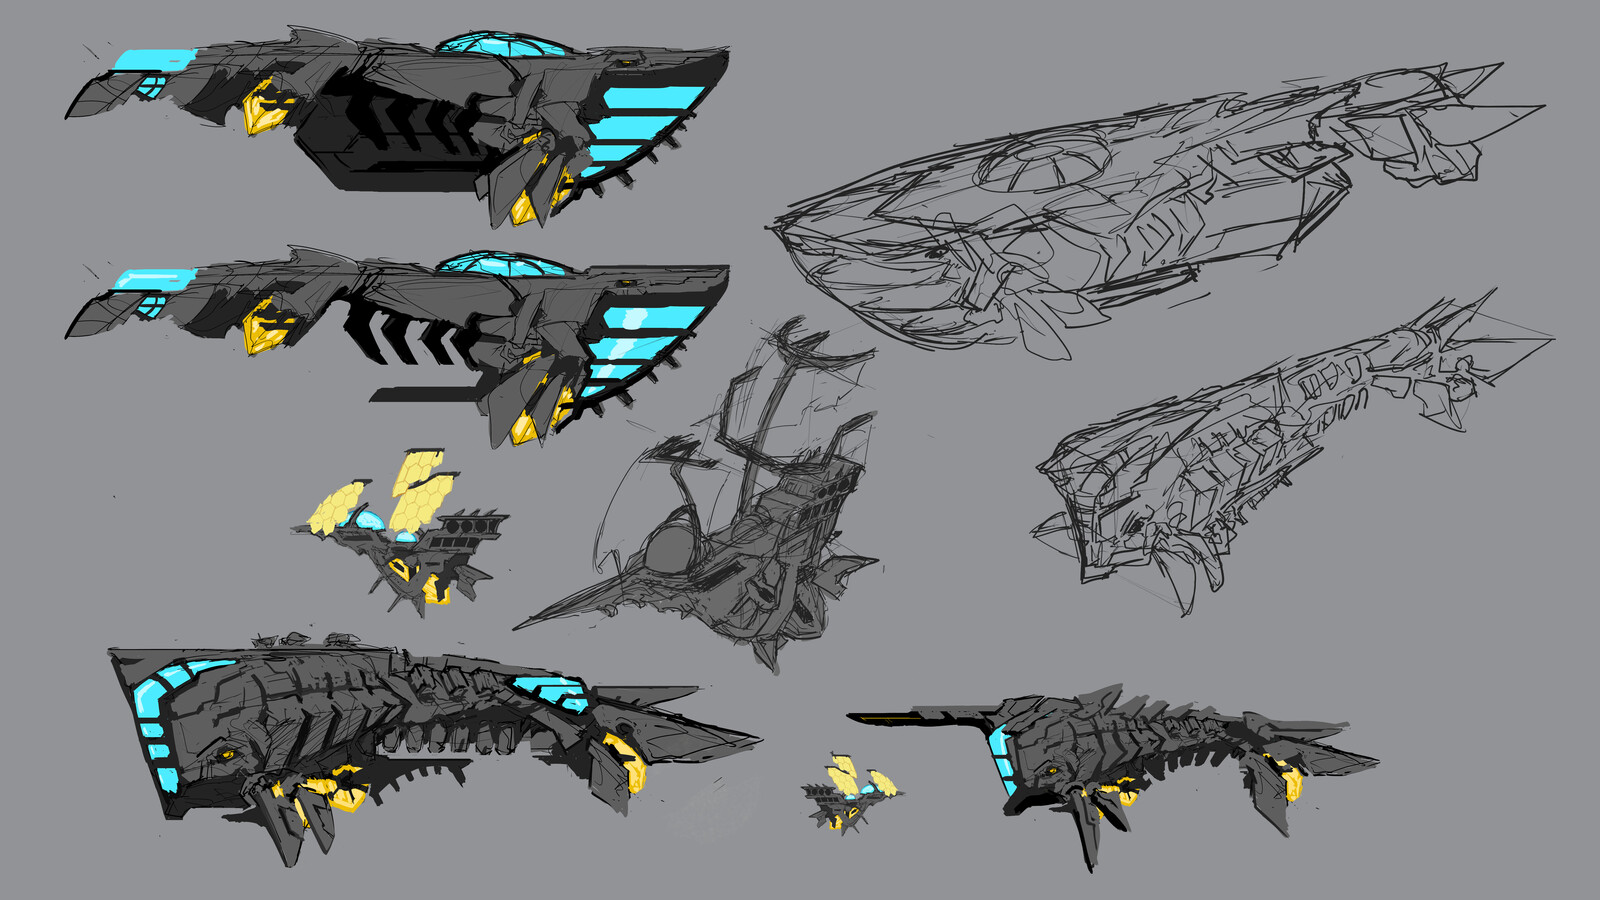 Loaded/unloaded, some early ship designs to scale as well as diff whale shapes before I settled on the main 2 Sperm Whale and Blue Whale